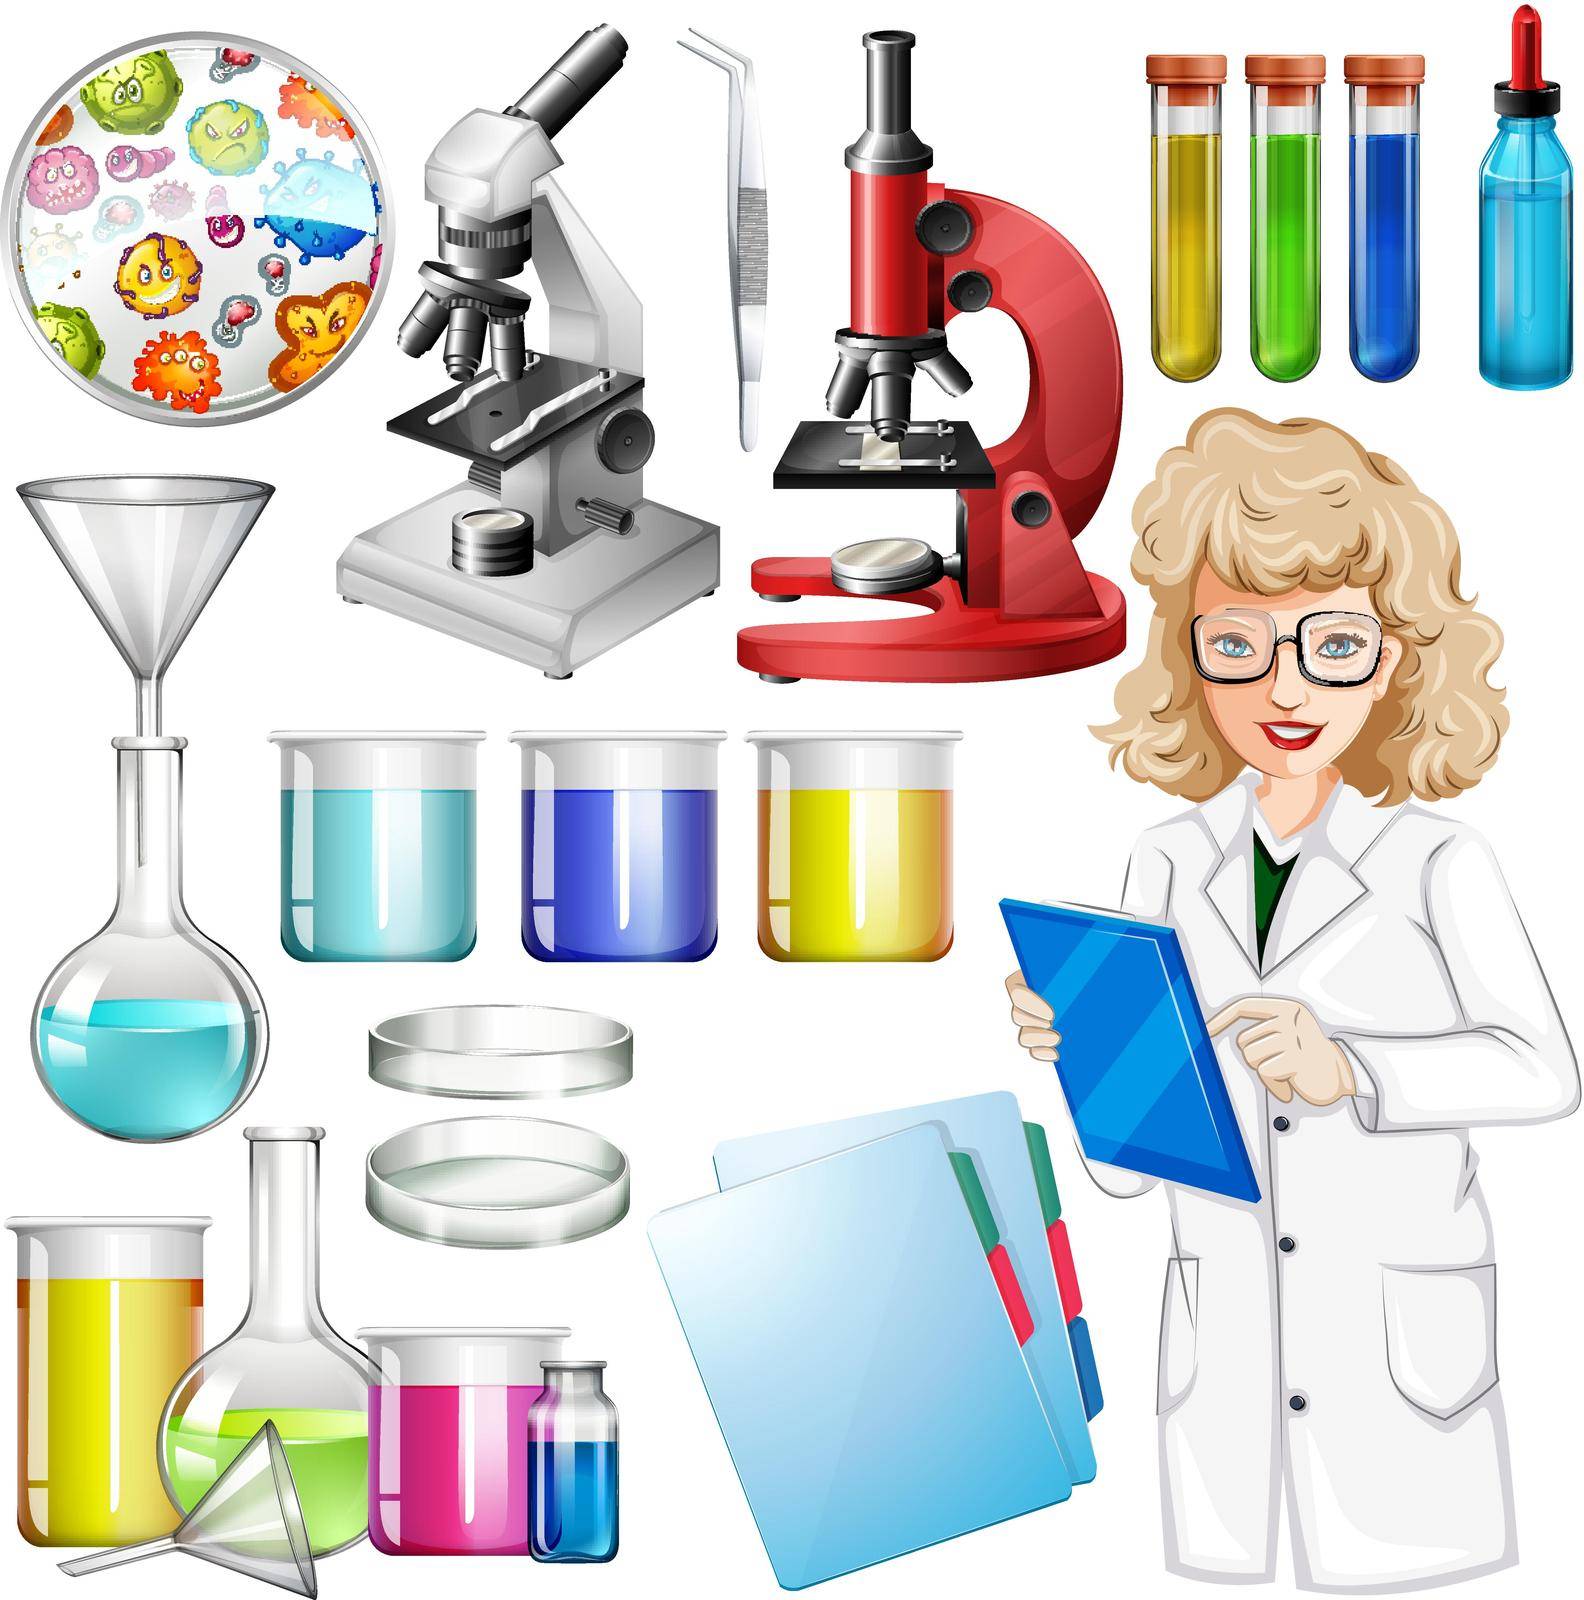 Scientist with science equipment by iimages